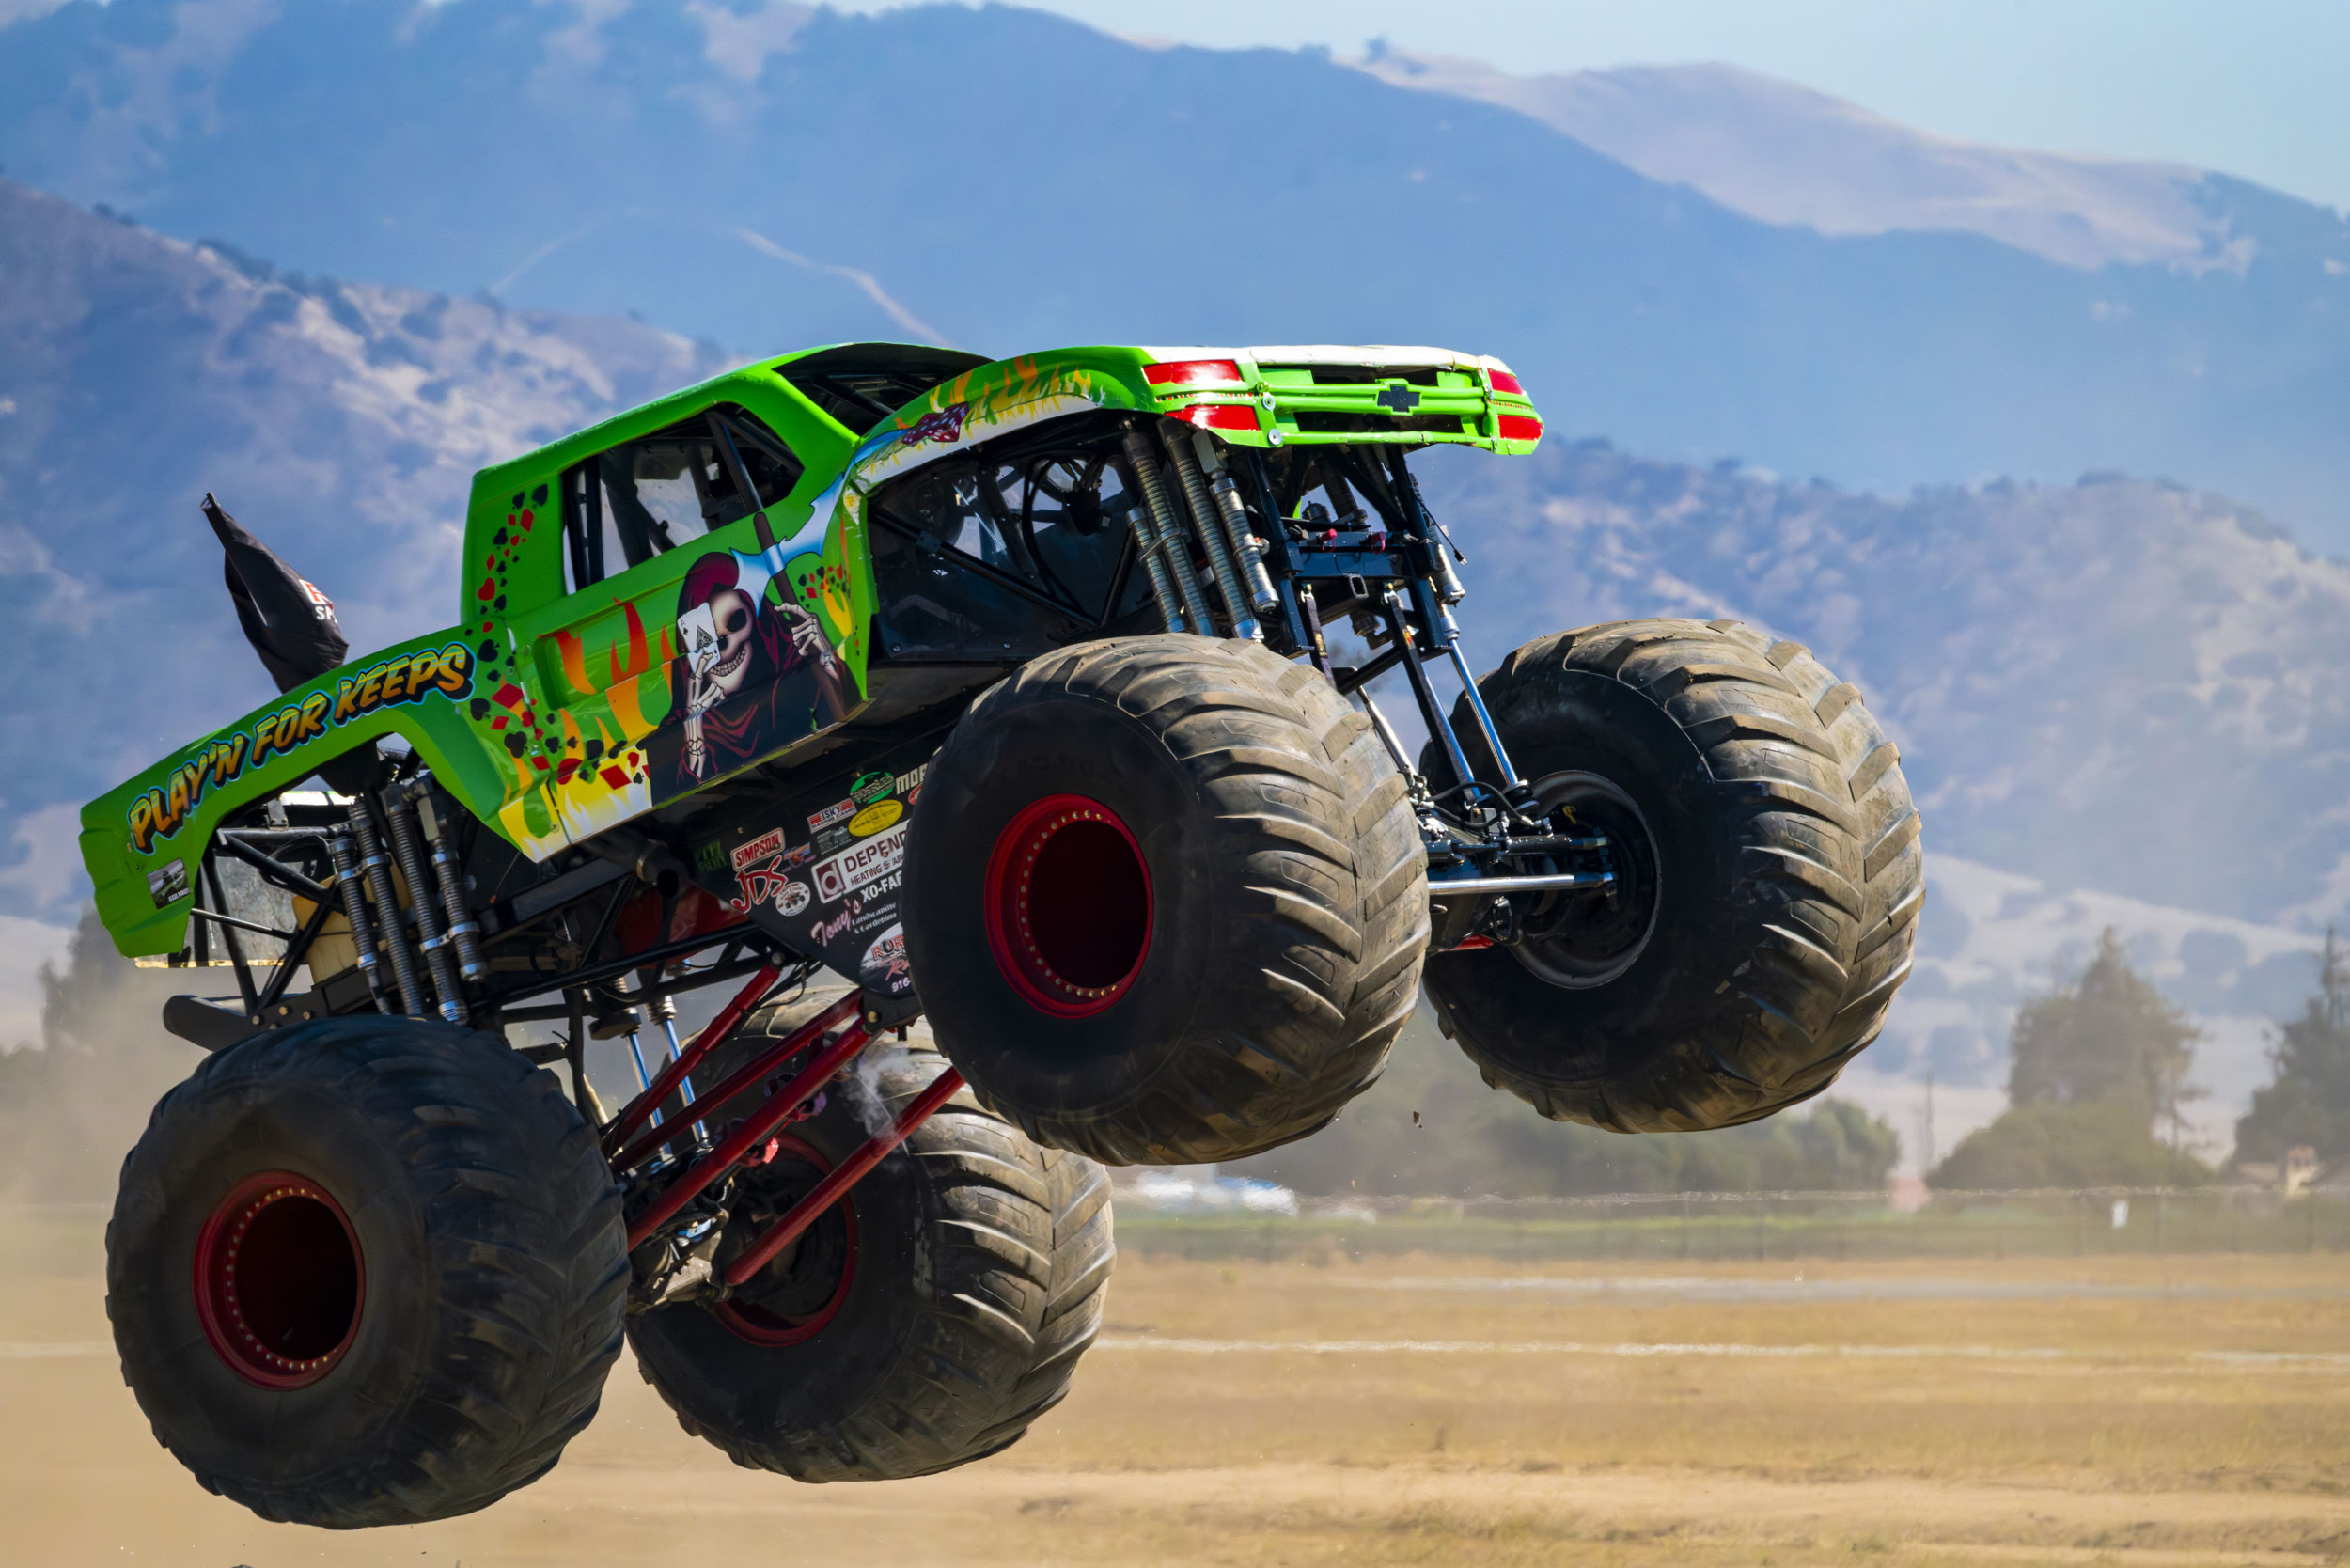 Monster Truck: PLAY'N FOR KEEPS jumpedJ